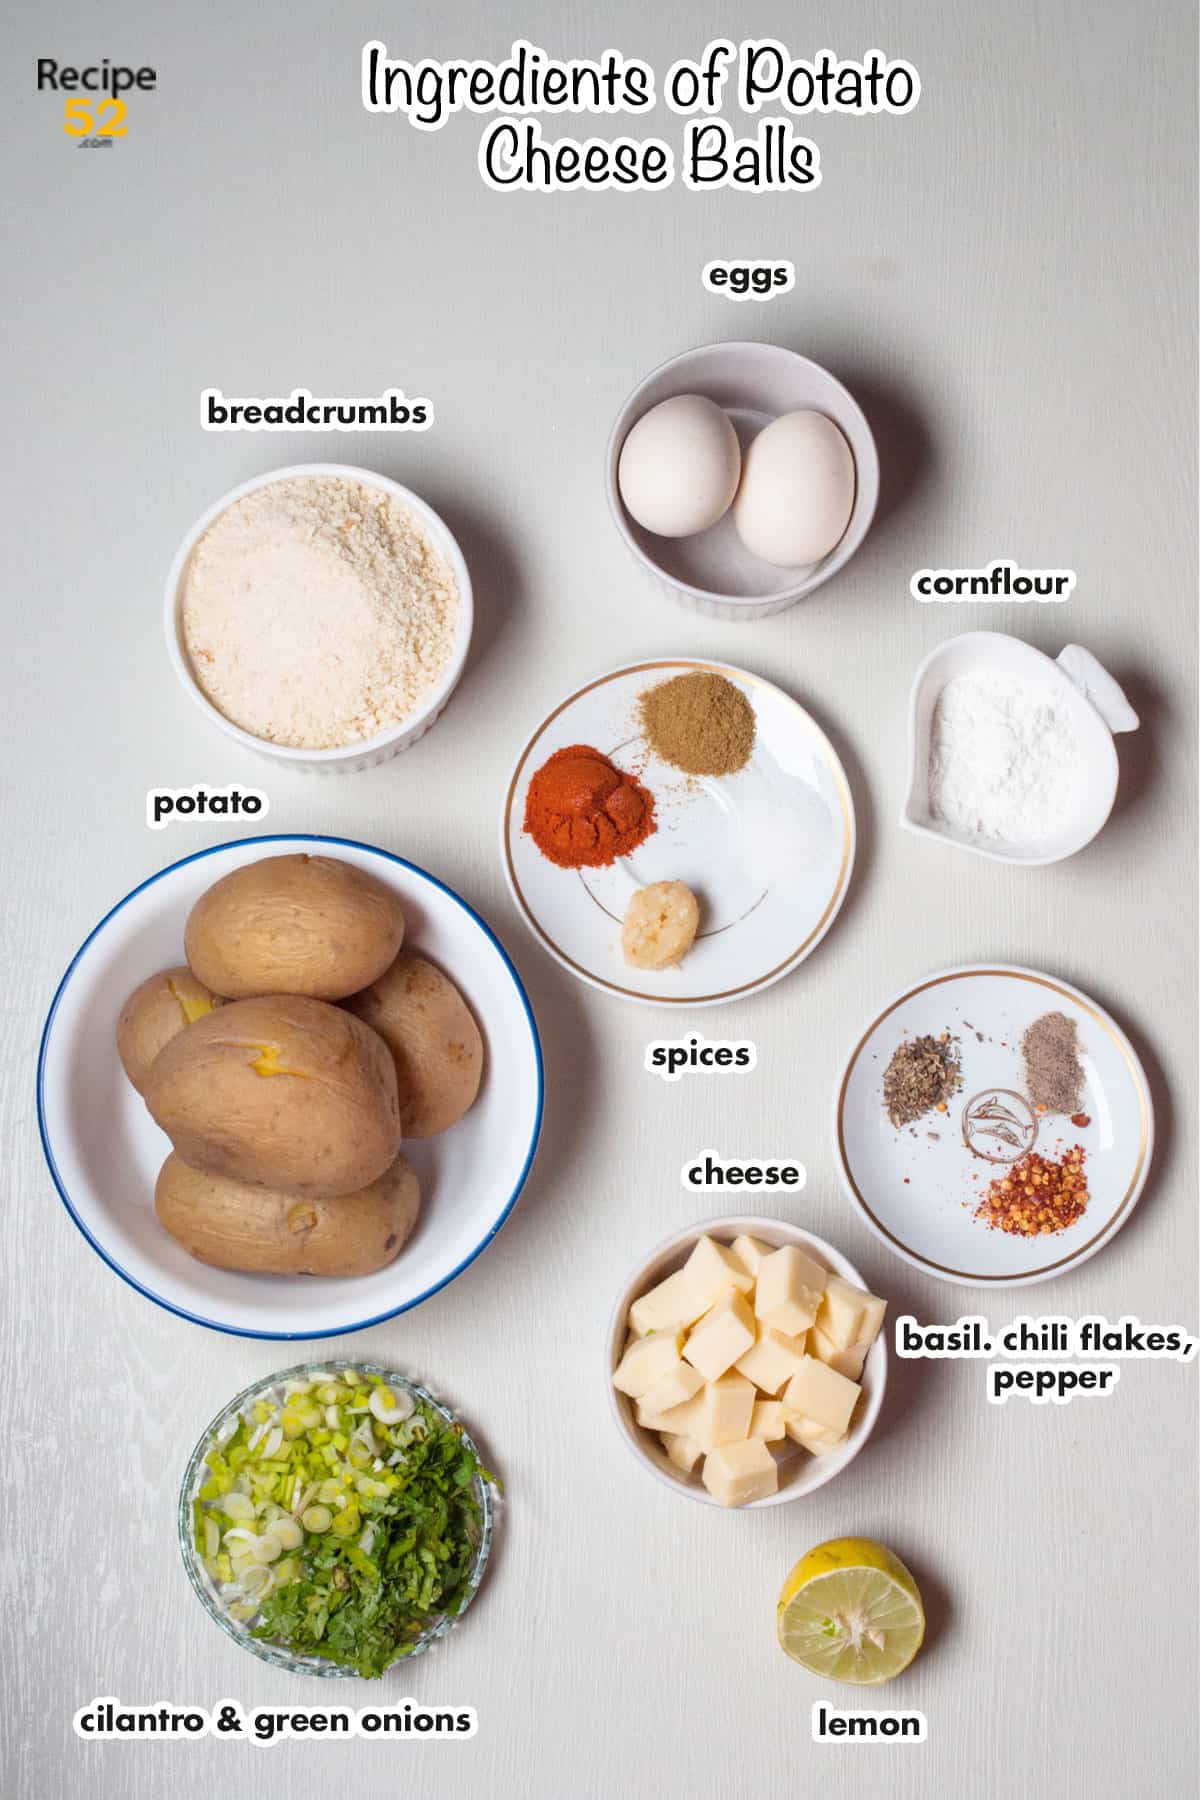 Ingredients of potato cheese balls on a white background with clear labels.